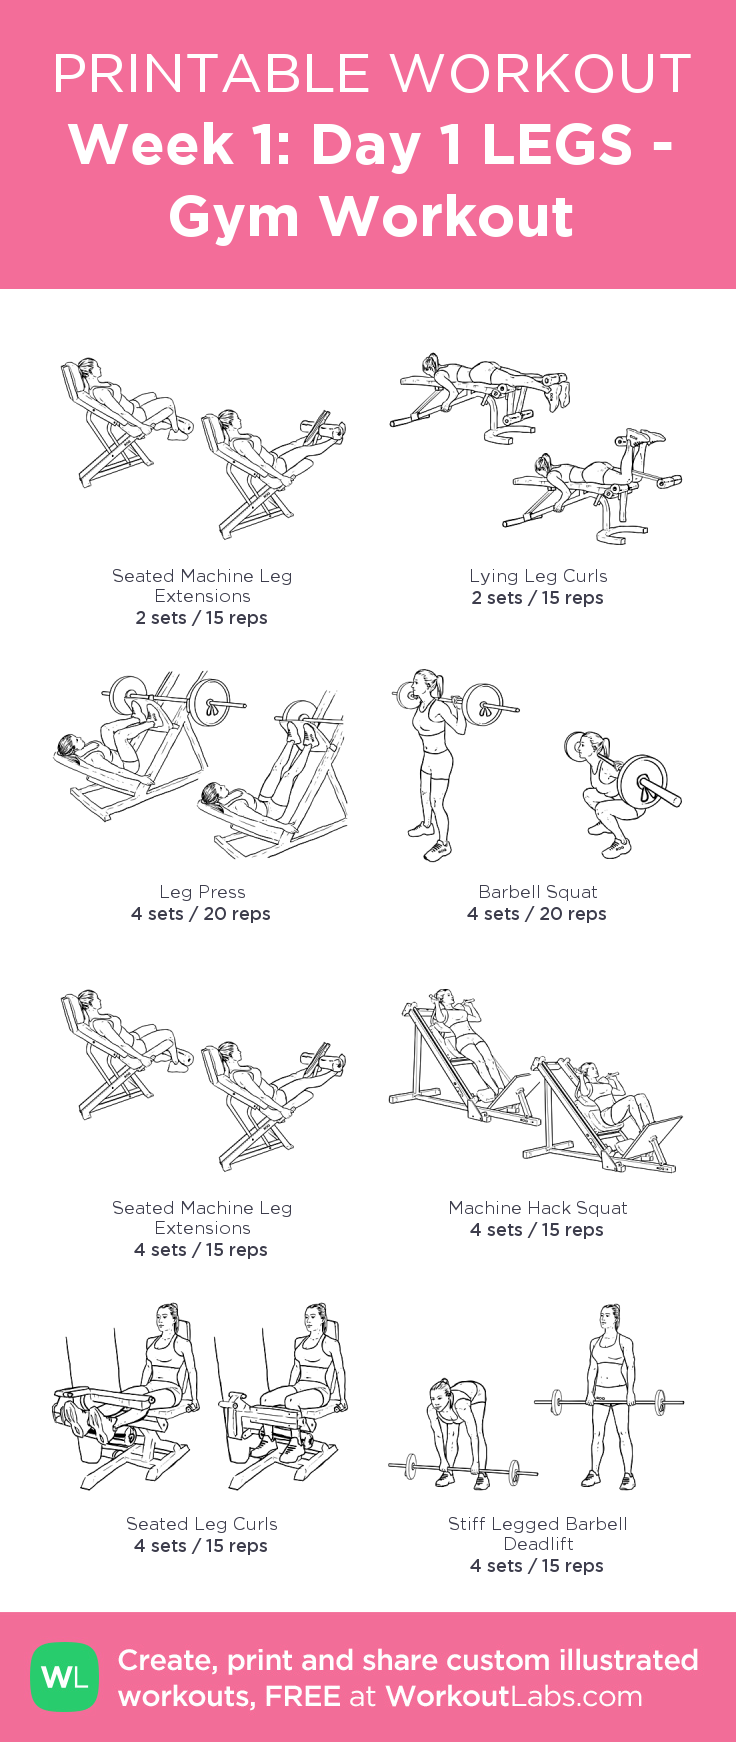 Week 1: Day 1 LEGS   Gym Workout: my custom printable workout by 